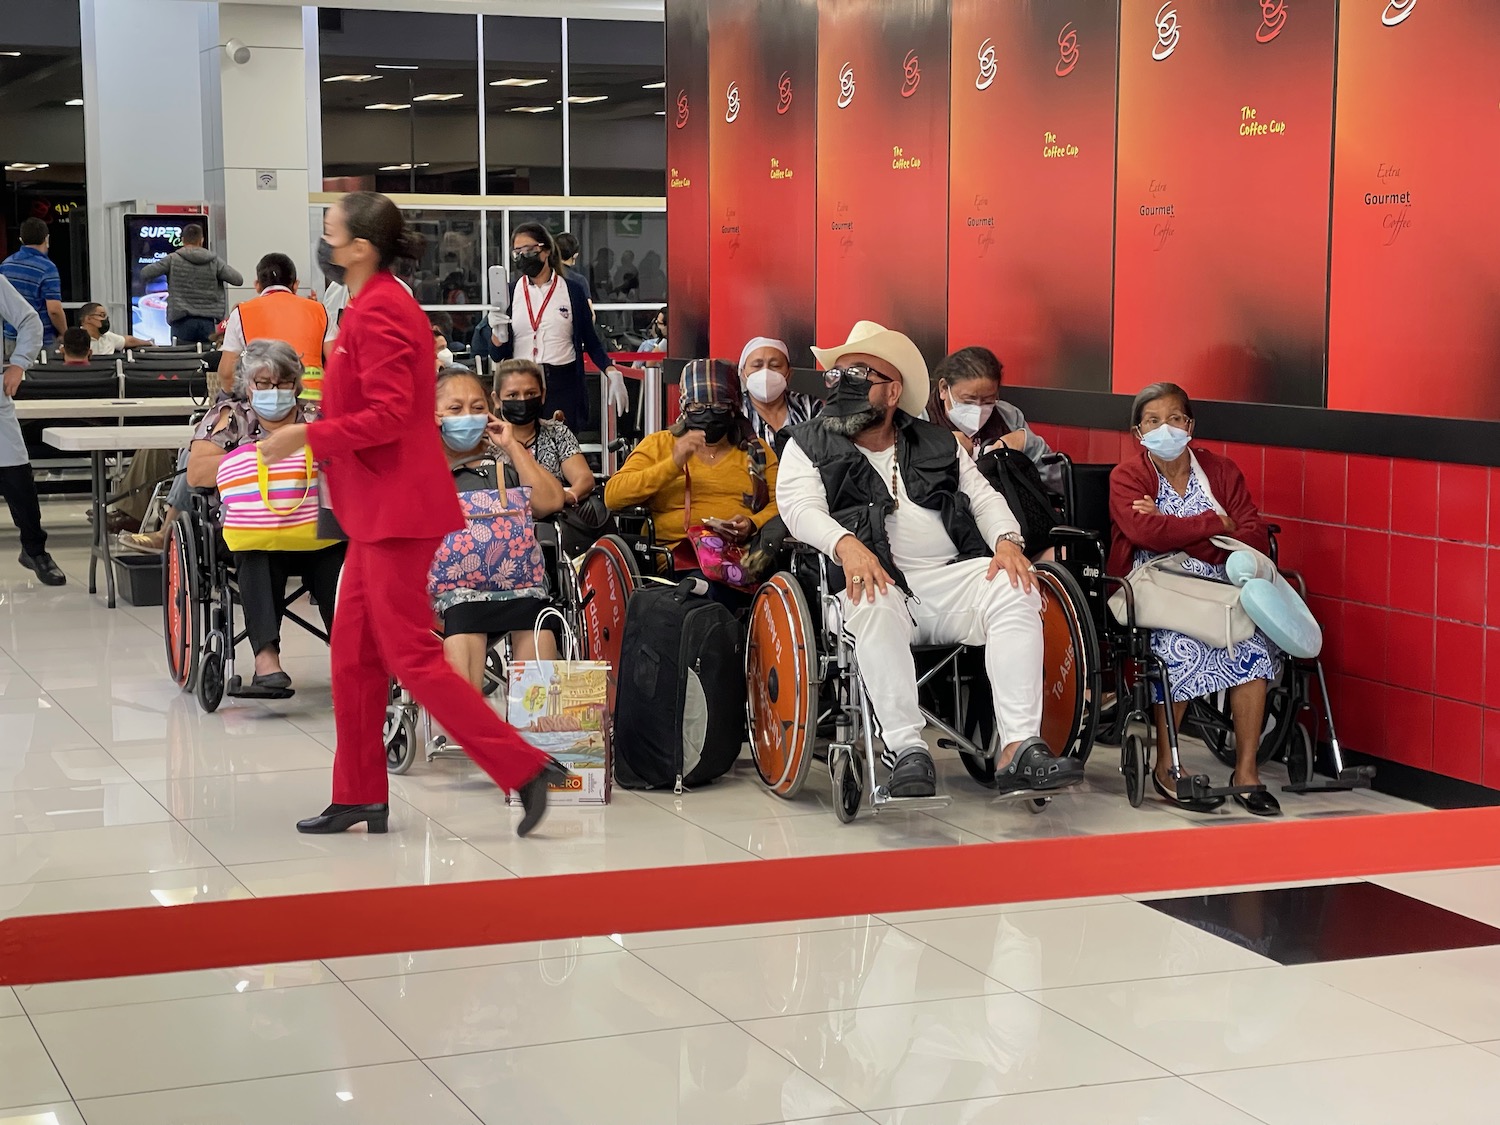 a group of people in wheelchairs with masks